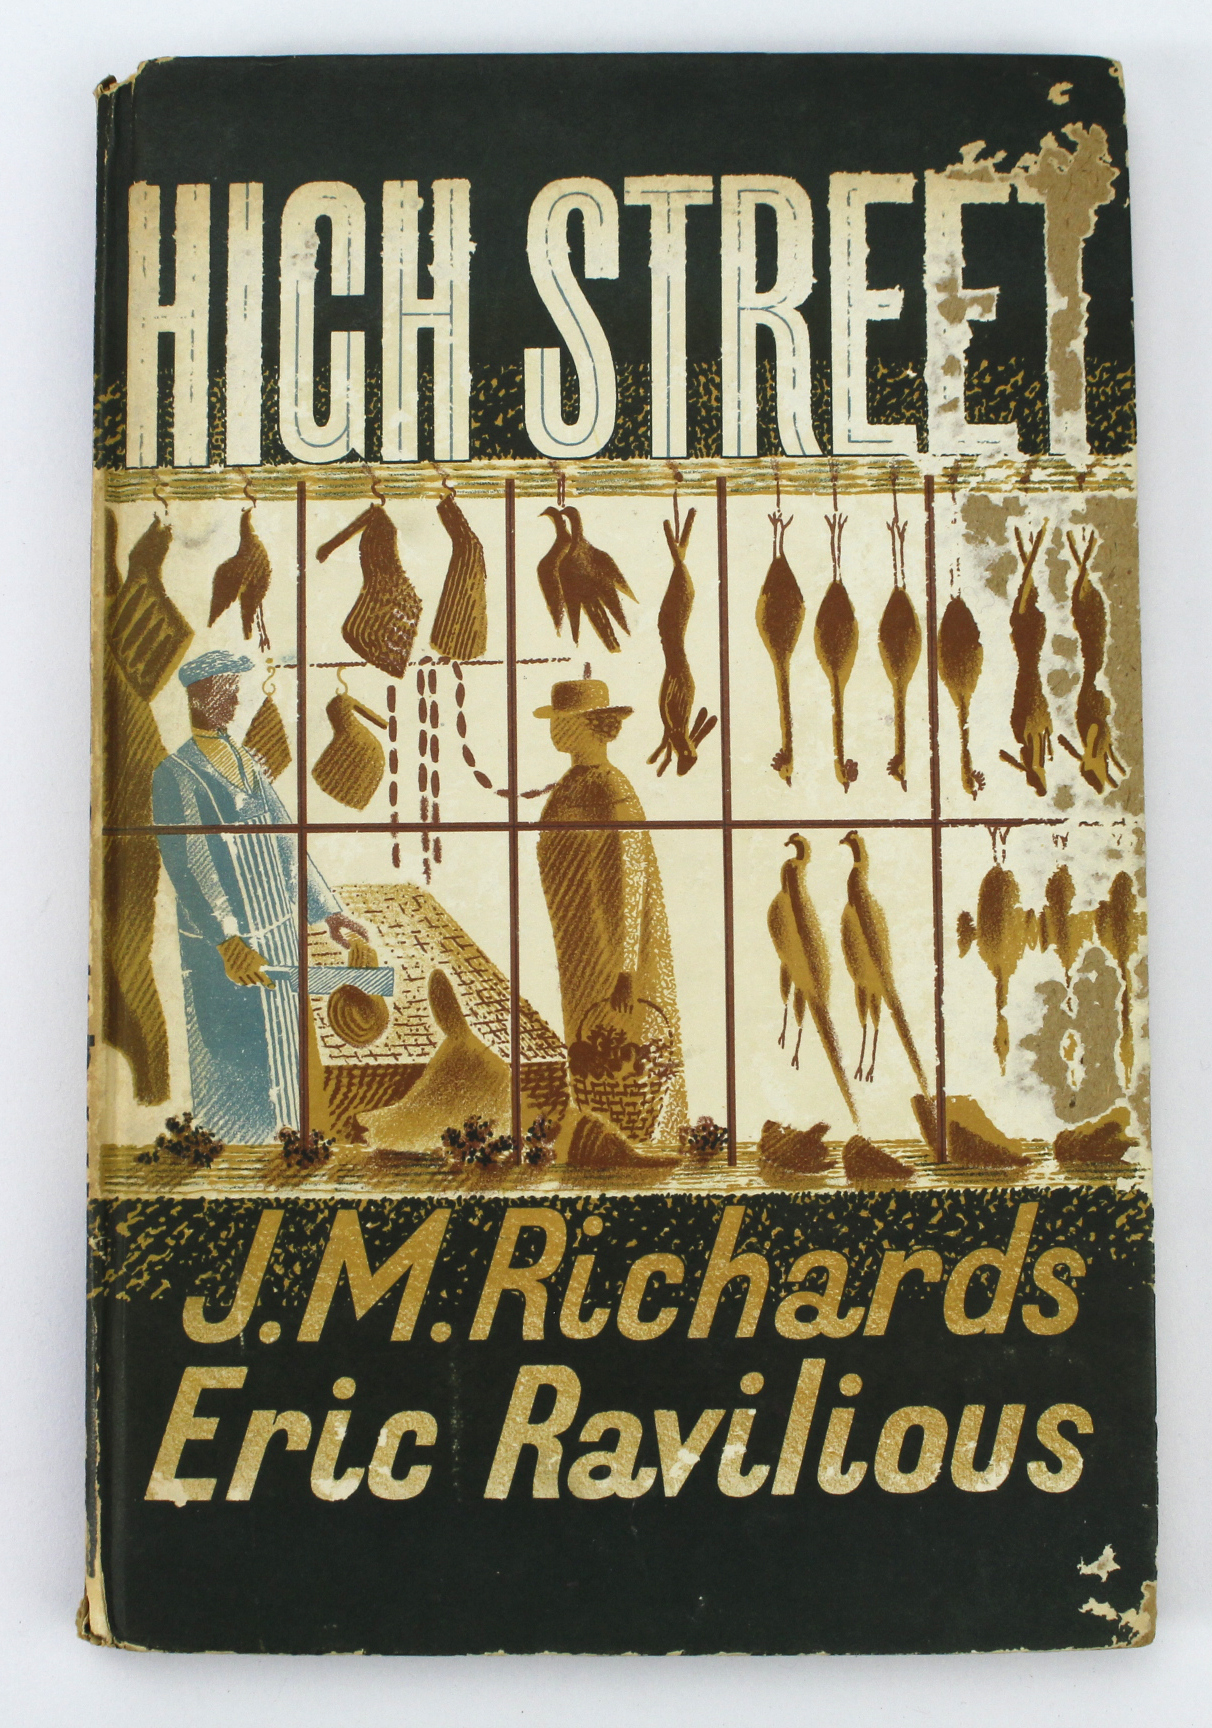 Ravilious (Eric, illustrator). High Street, by J. M. Richards, 1st Edition, published Country Life - Image 2 of 2